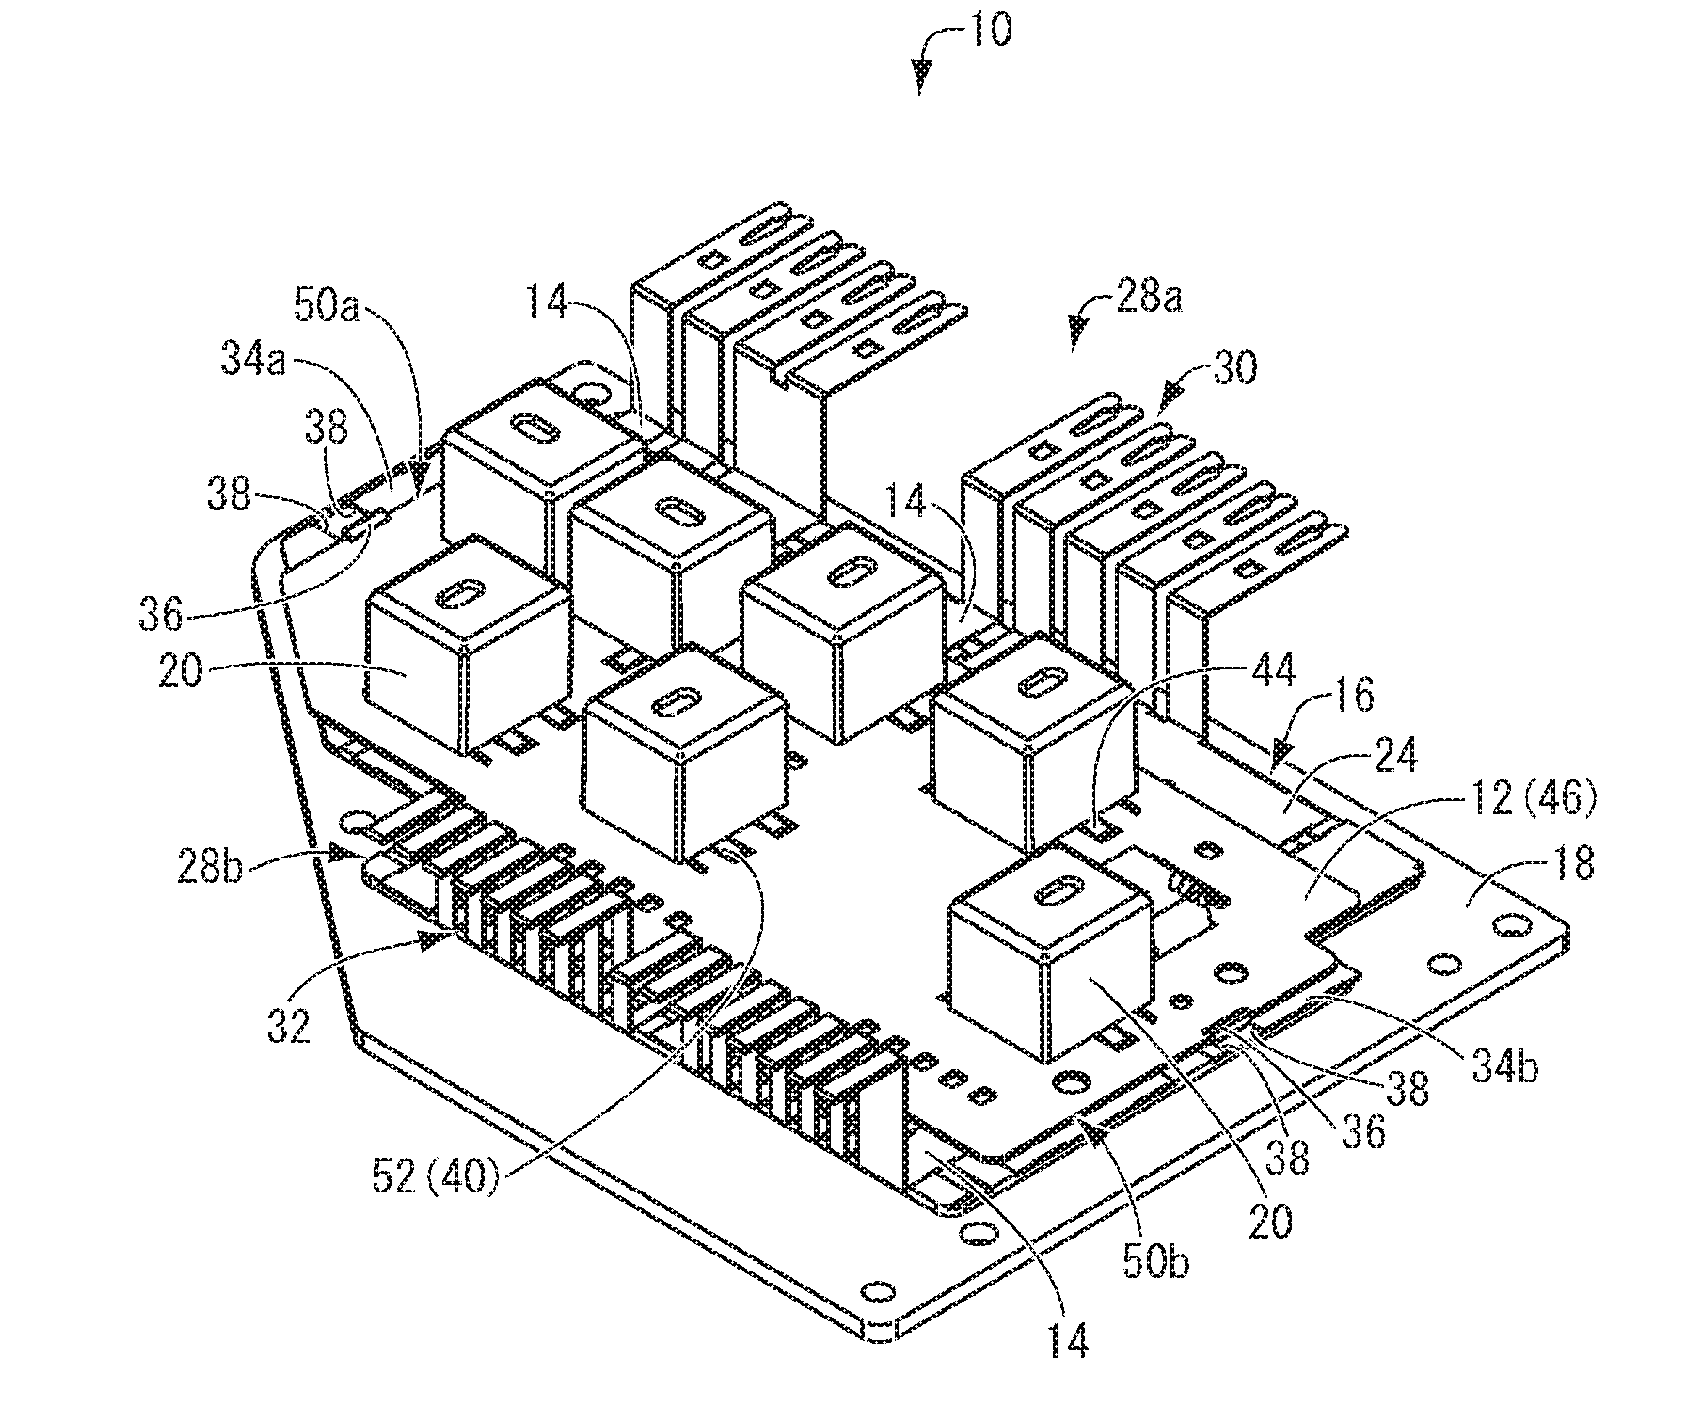 Circuit assembly